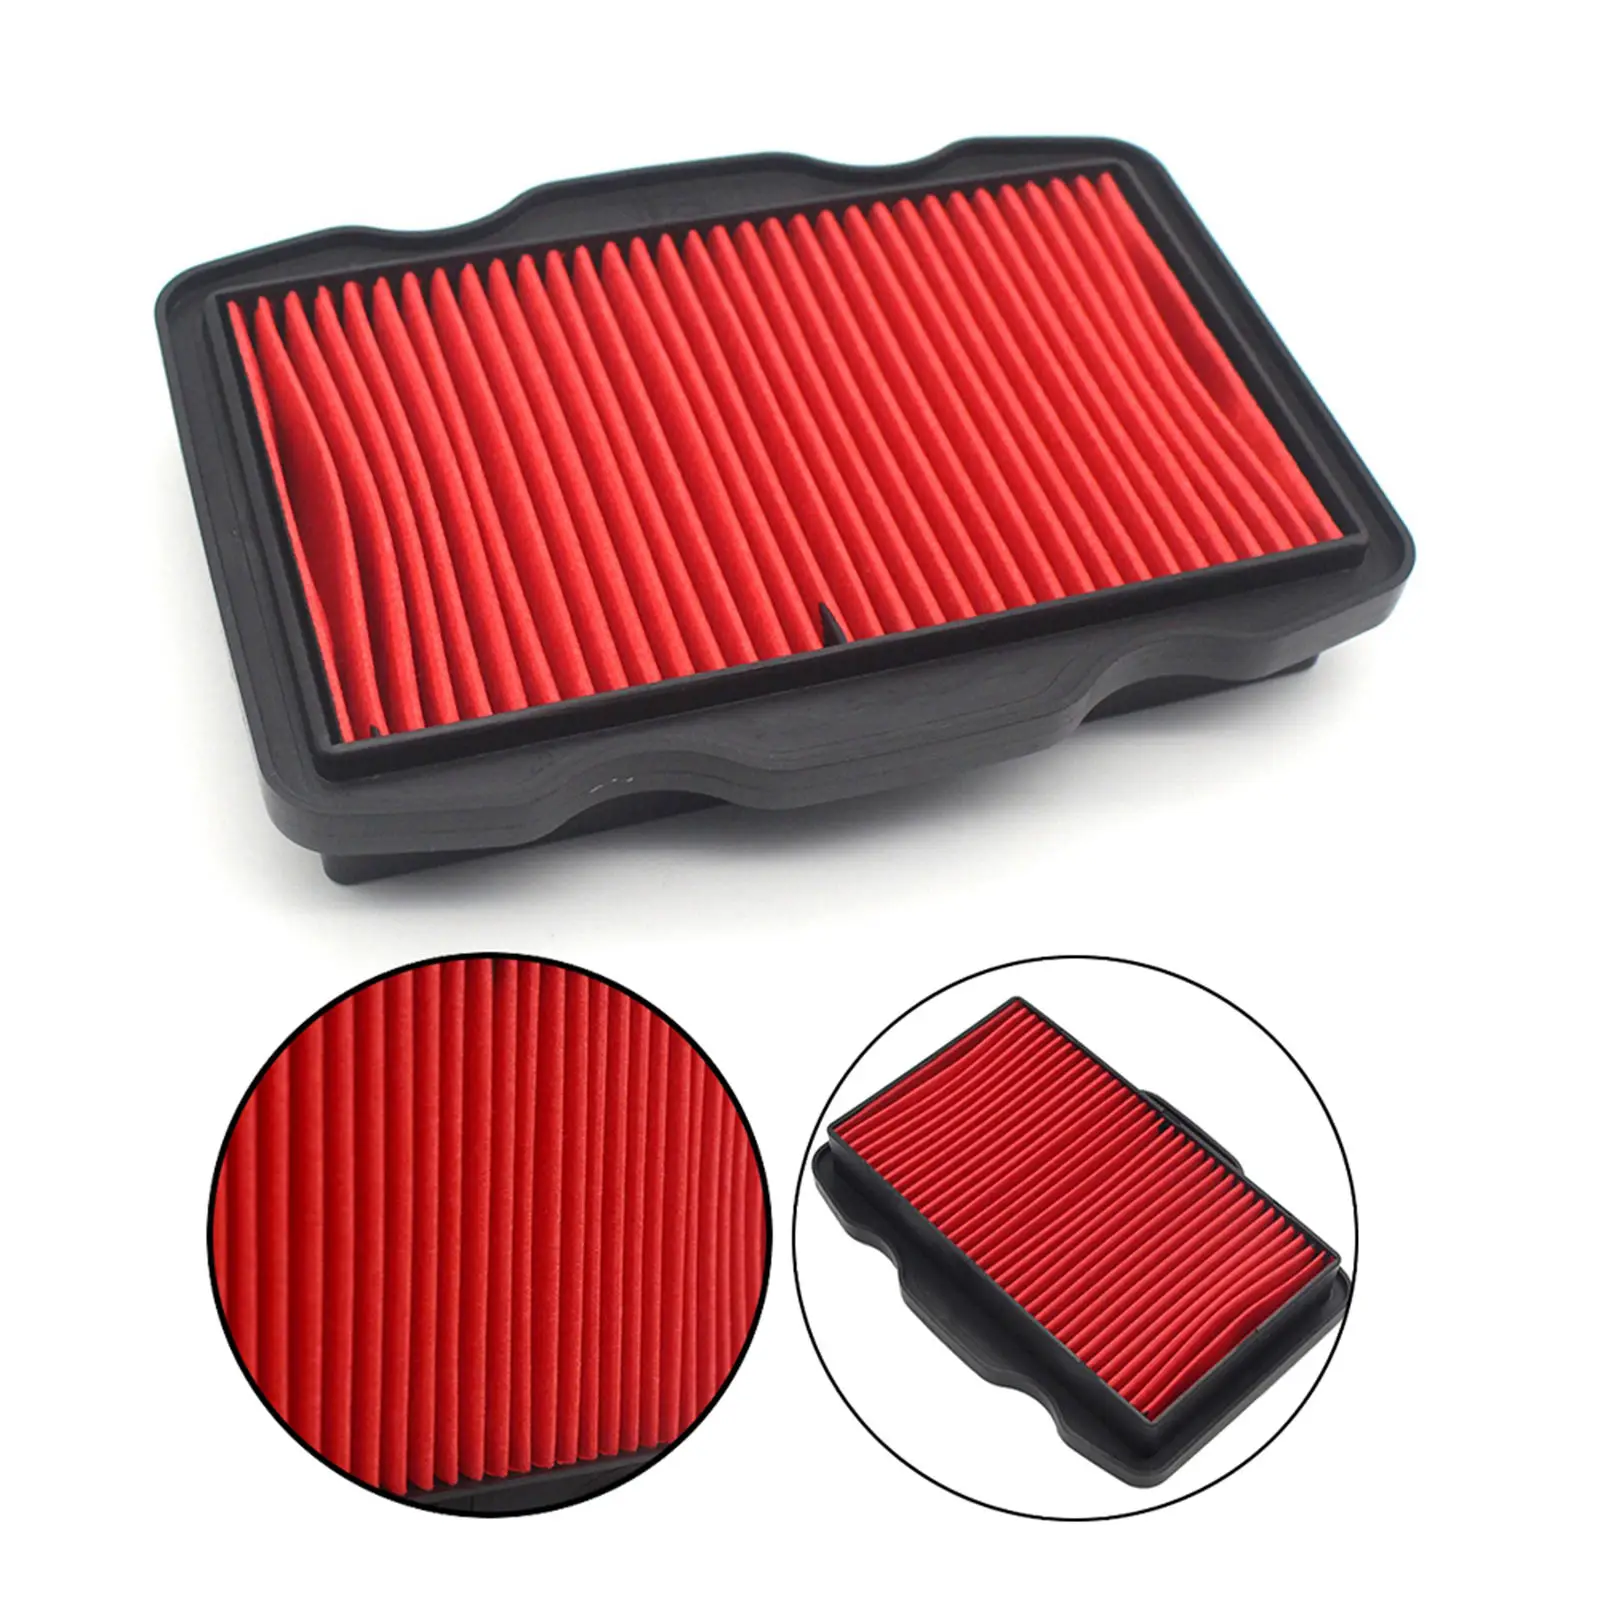 Motorcycle Air Filter Replacement Parts Accessory for Honda CB125F GLR125 15-19